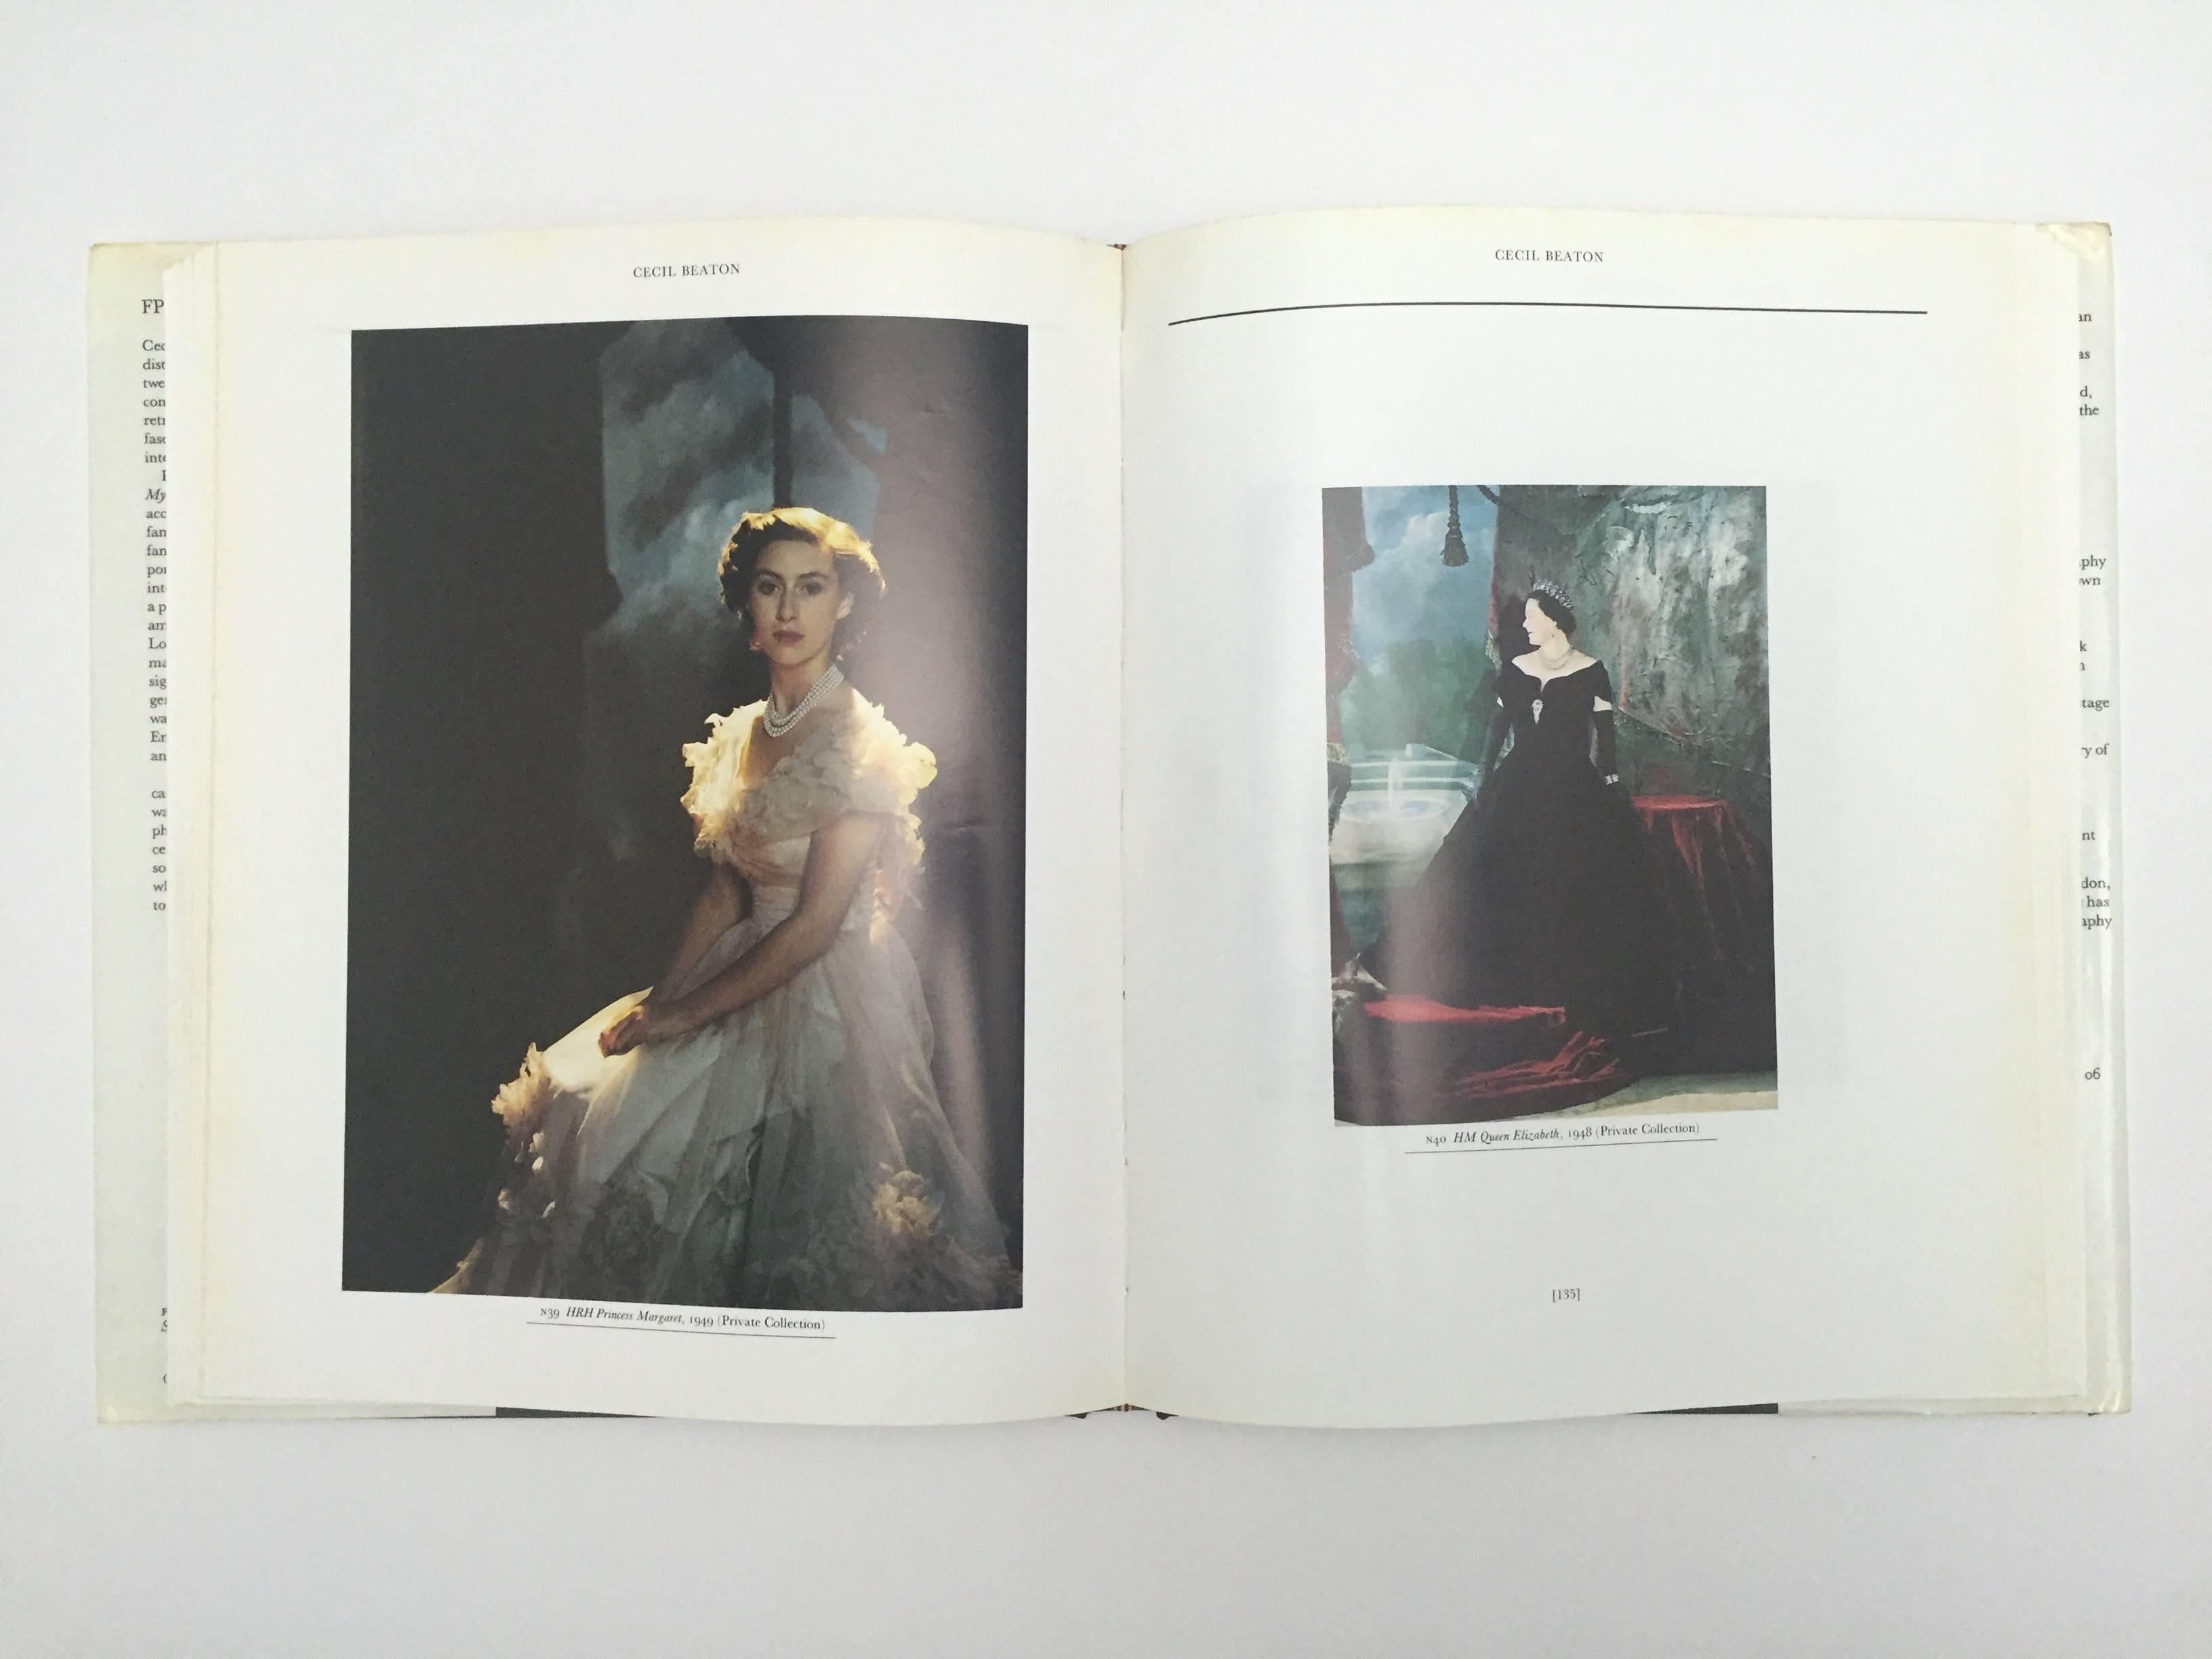 First edition.

Published in Boston by Little, Brown and Company, in 1986.

This retrospective monograph brings together numerous photographs from the five exceptional decades of Beaton's career. A celebration one of the most critically